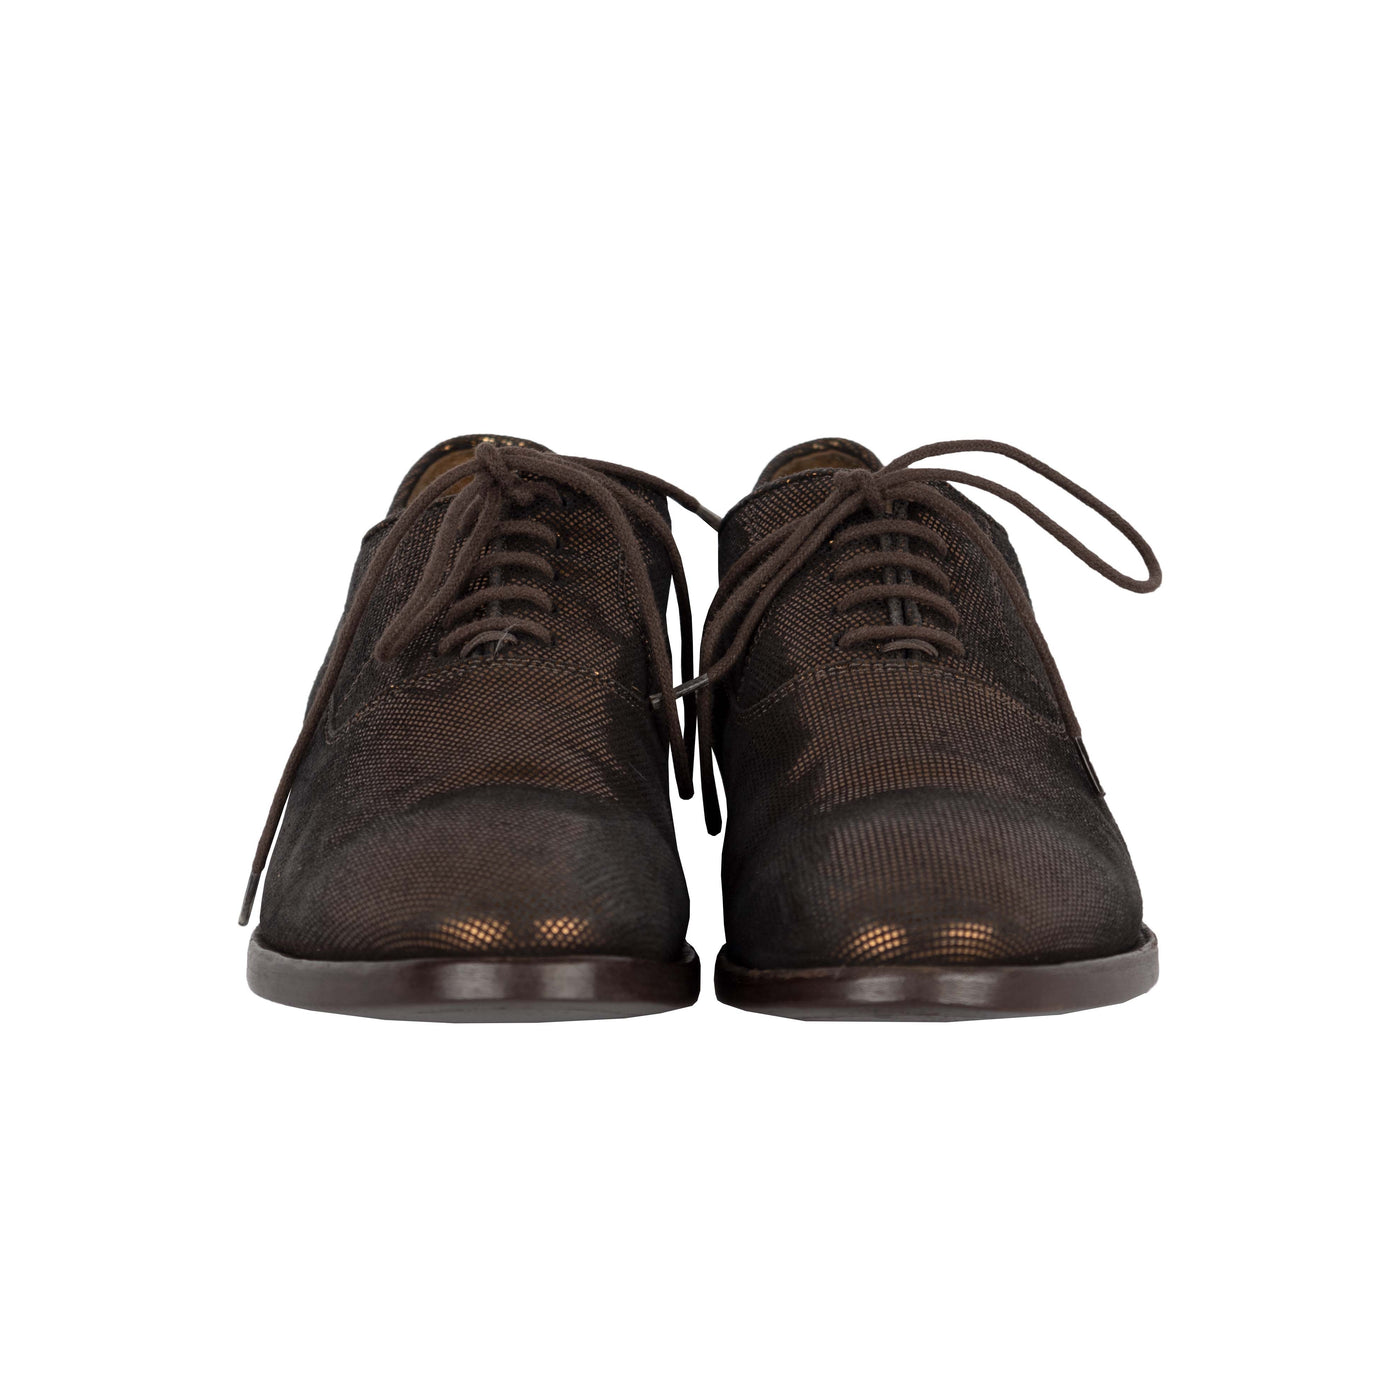 Secondhand Paul Smith Metallic Lace-up Shoes